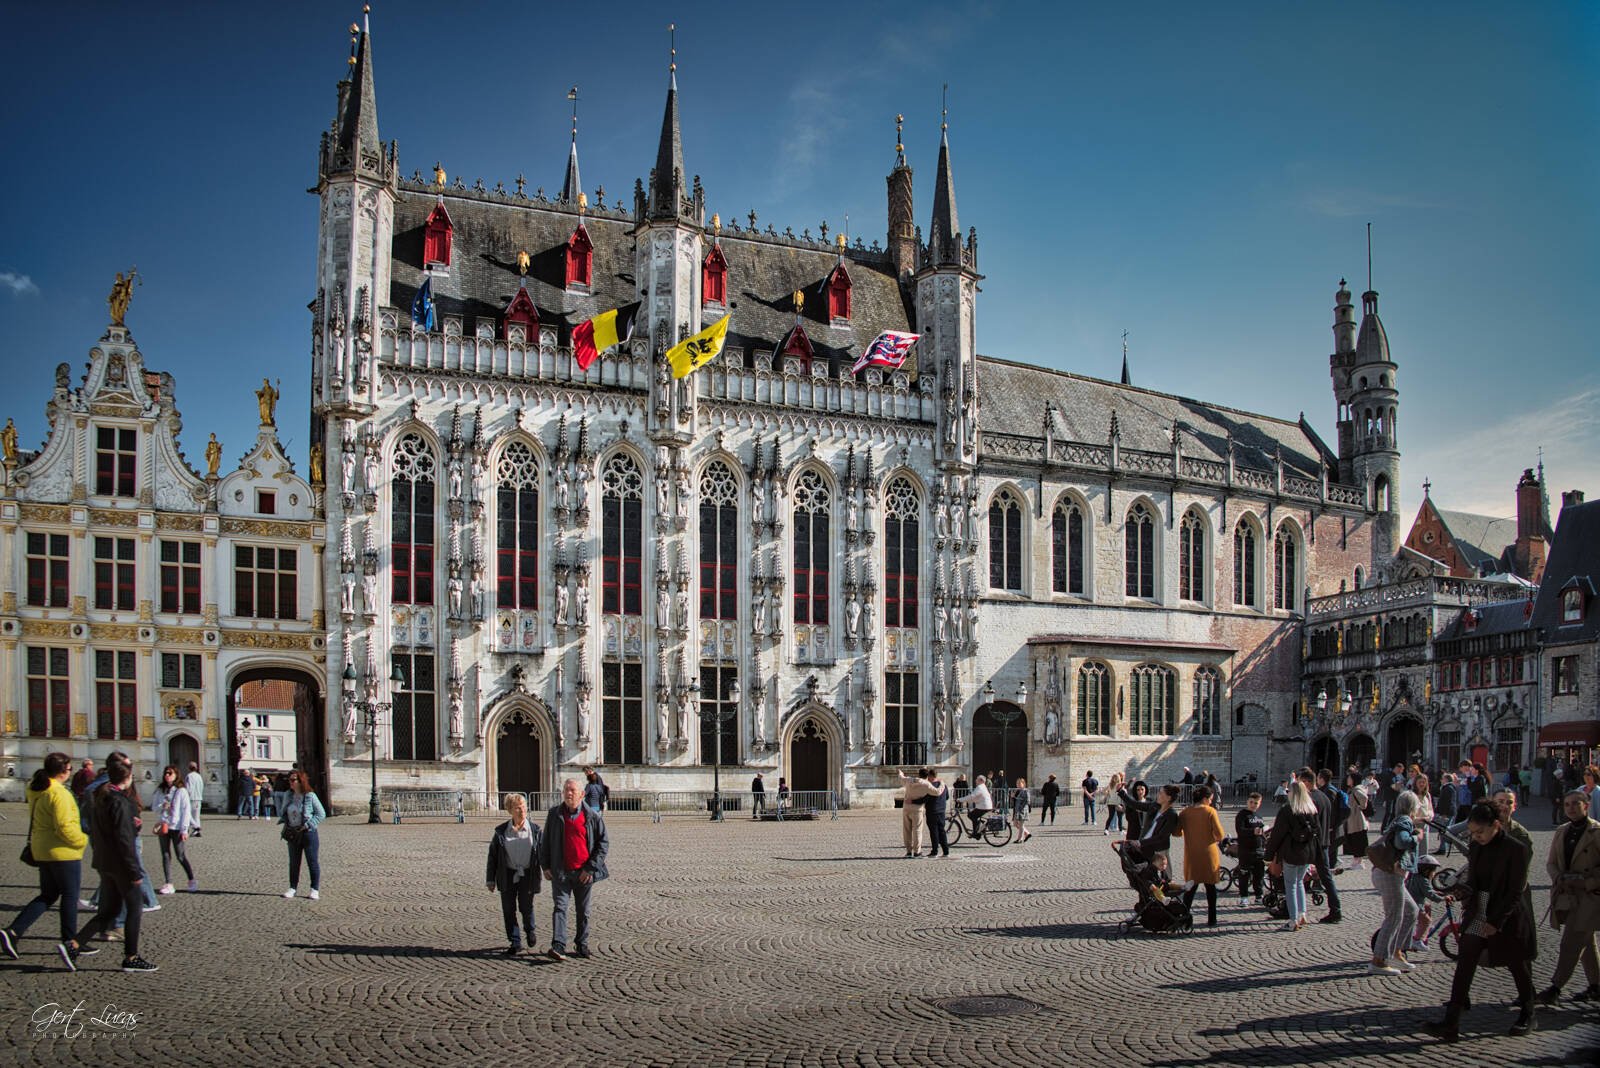 Image of Burg Square by Gert Lucas